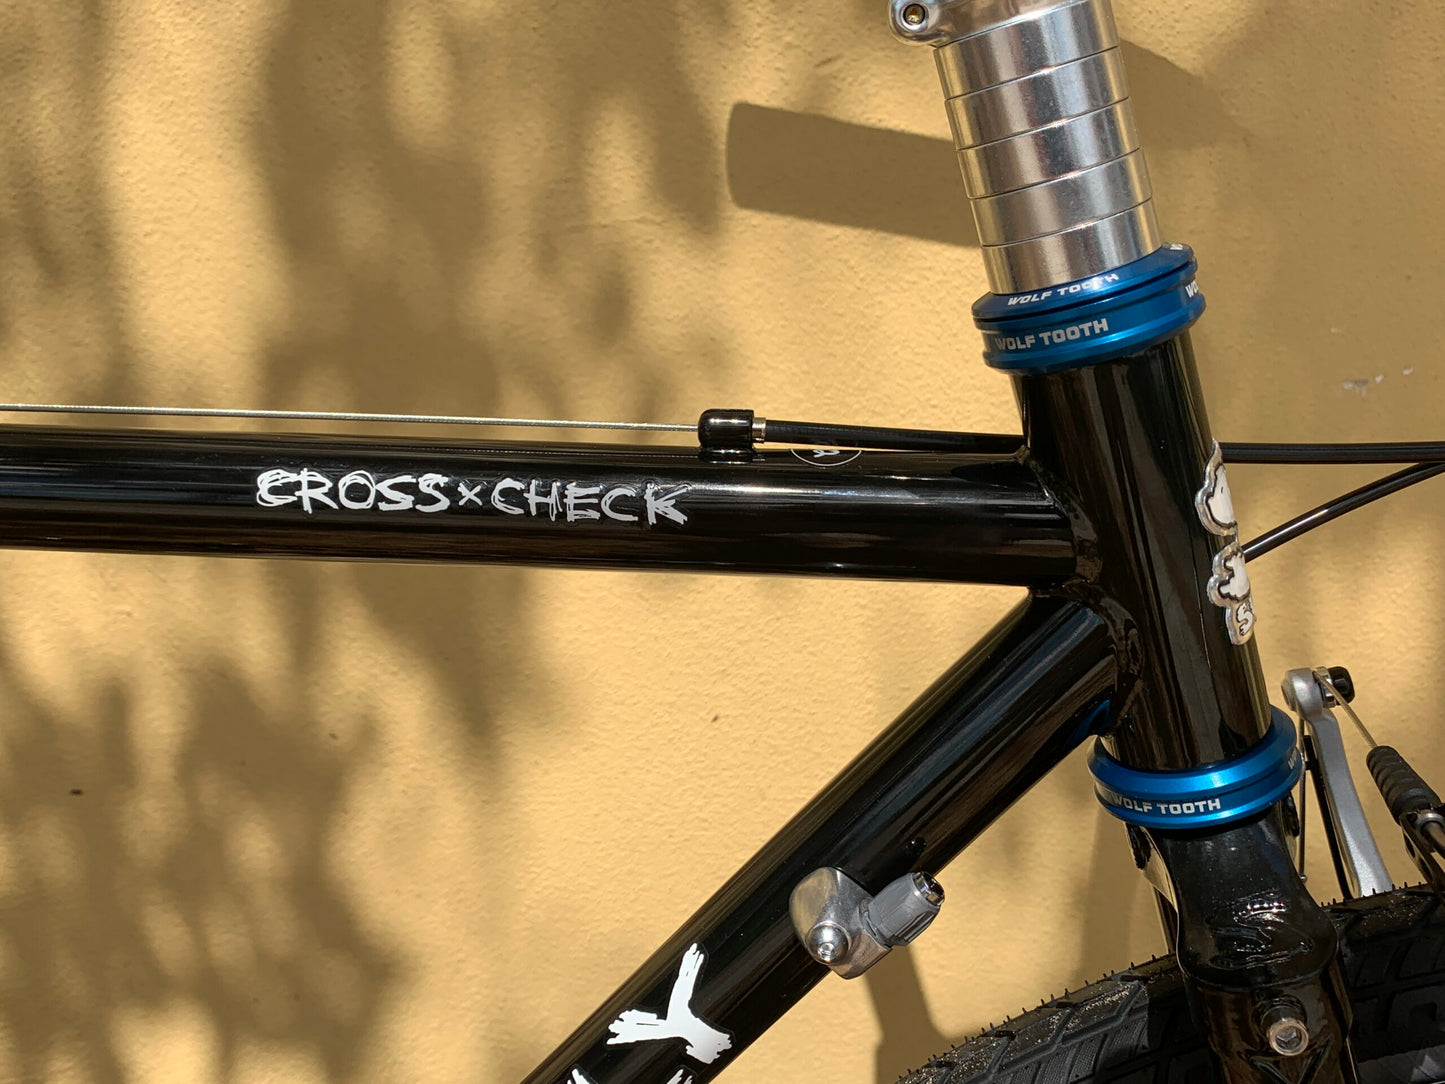 Surly Cross Check front